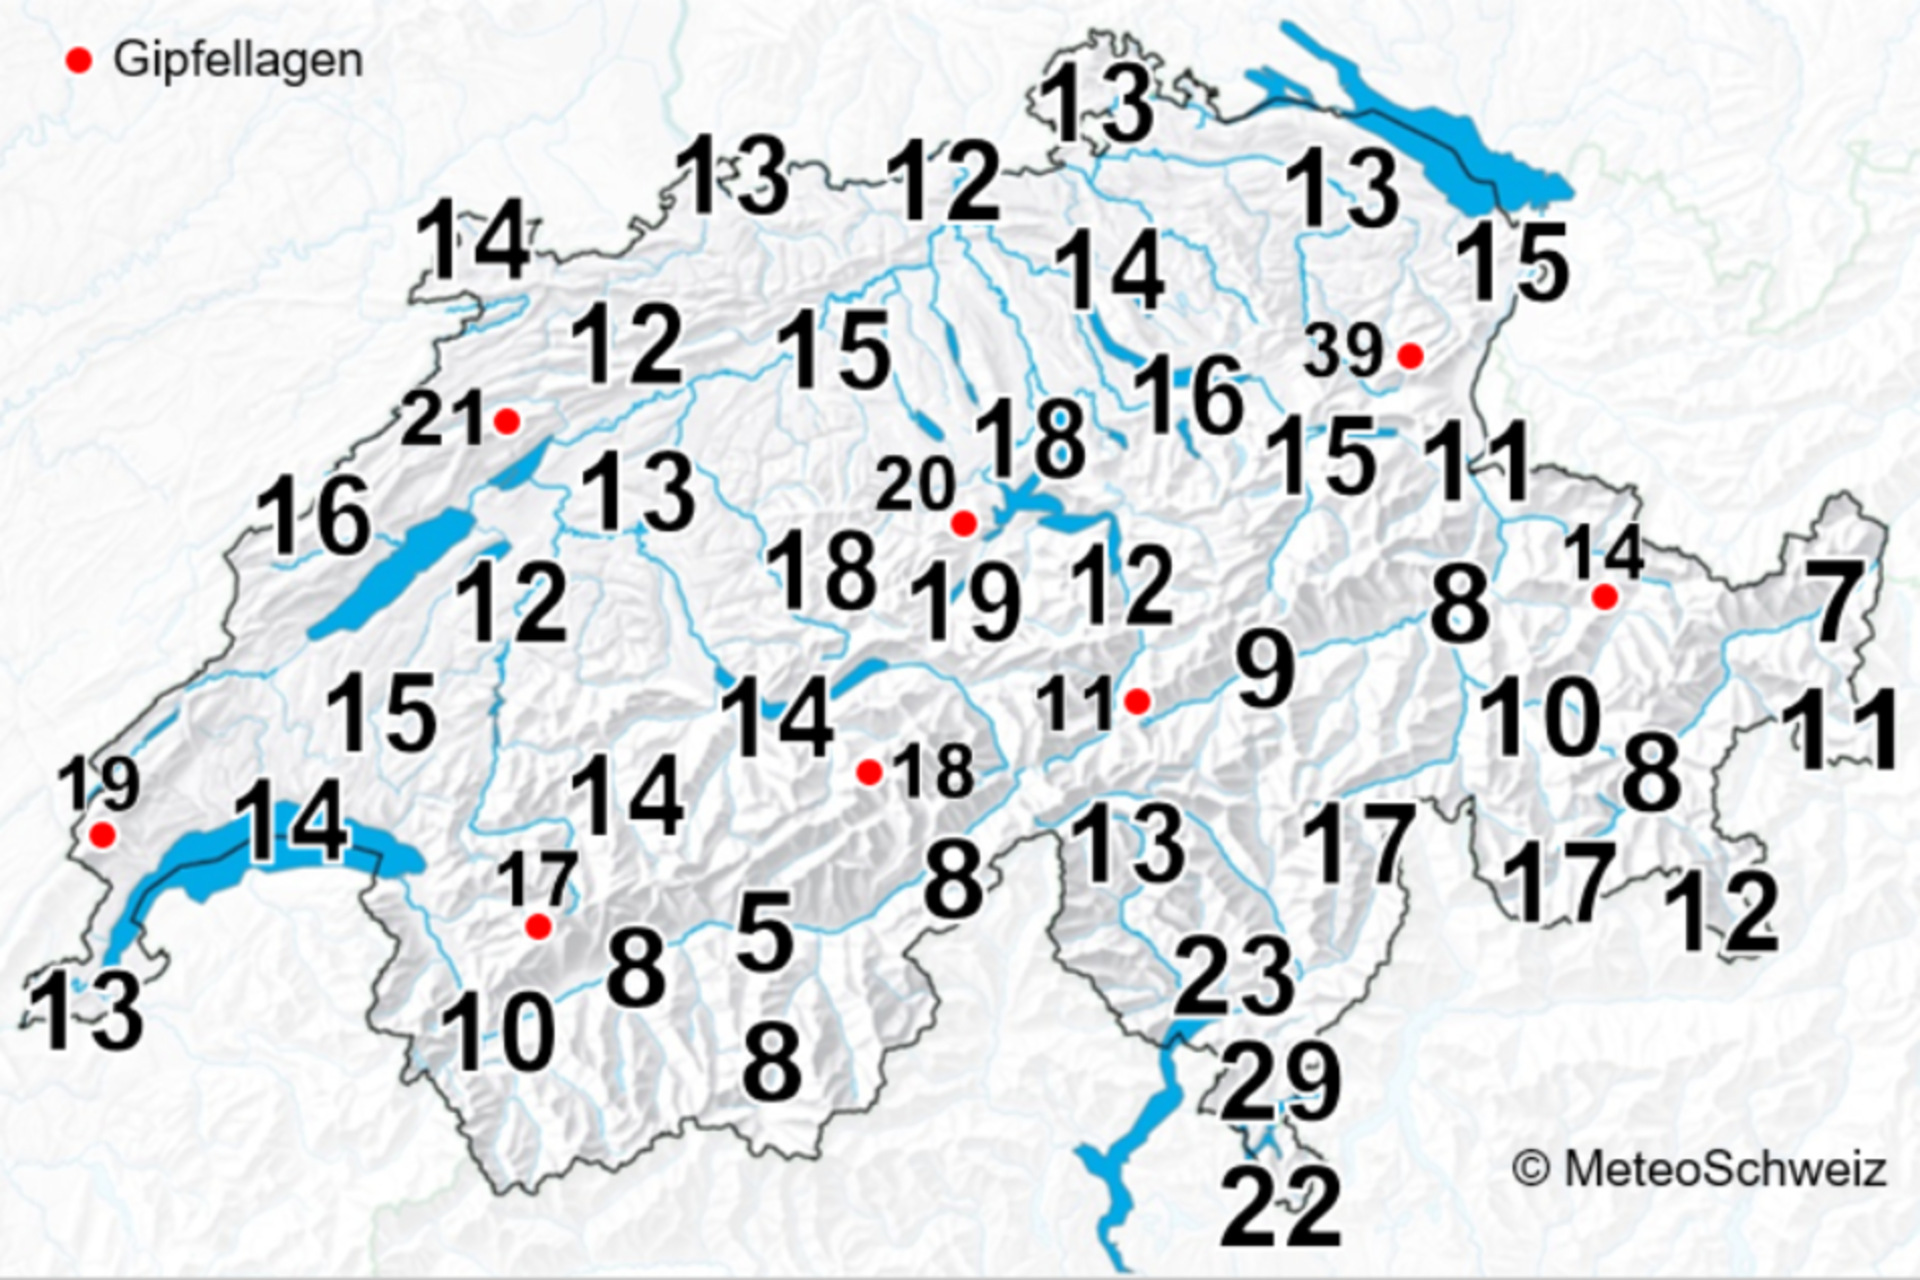 Lightning: the average number of days with thunderstorms per year in Switzerland, meaning at least one thunderstorm per day, for the period 2000-2020